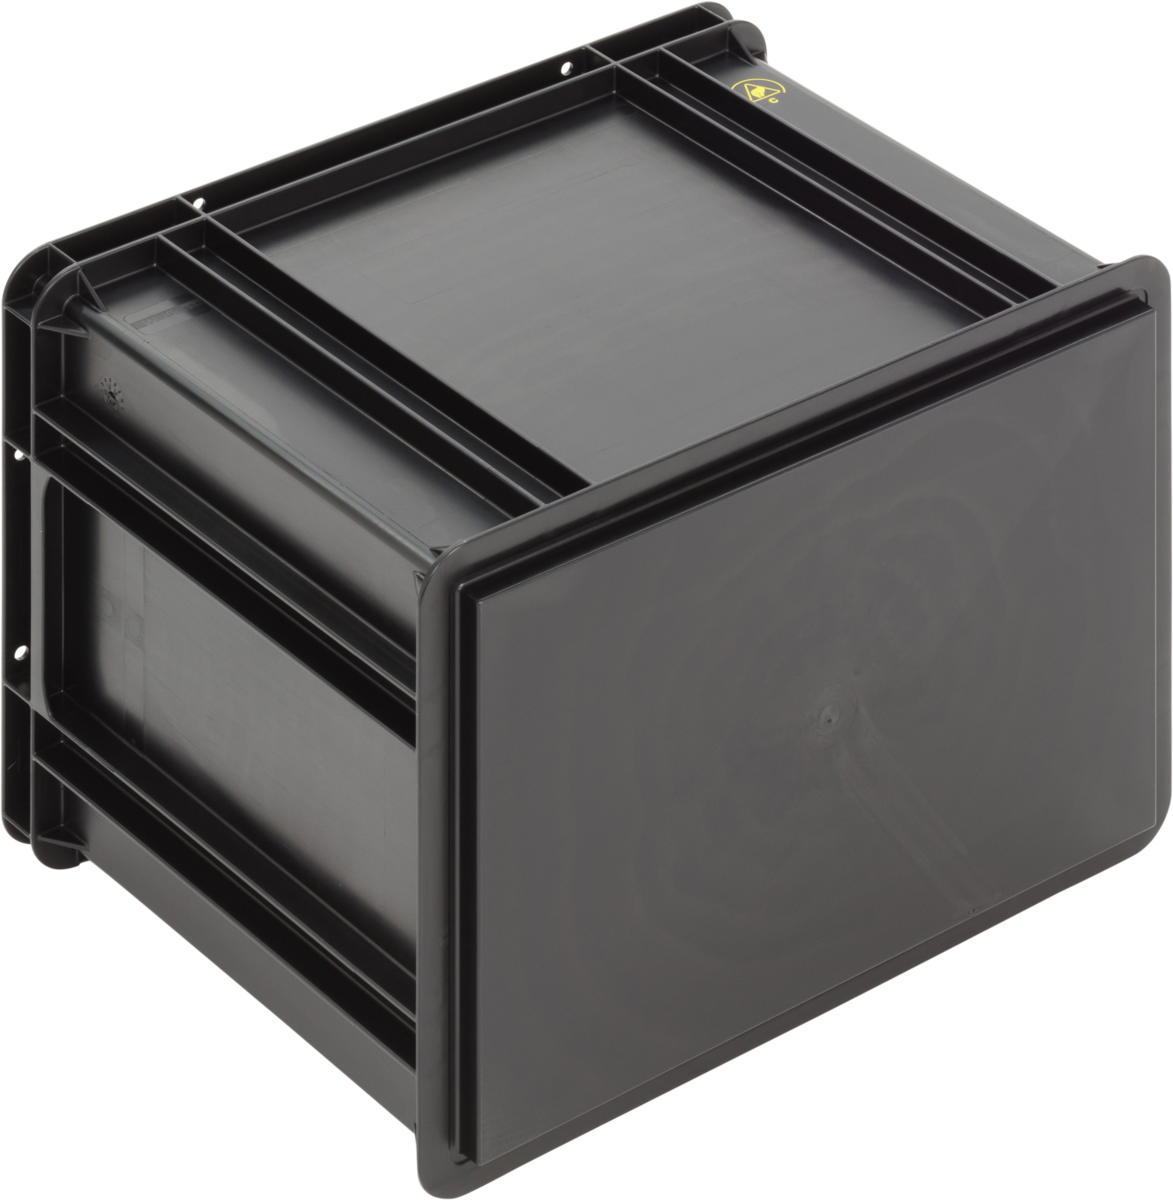 ESD-Safe-SGL-Norm-Stacking-Bin-Containers-Flat-Base-Ref.-4332.007.992_1004410_400x300x320_02